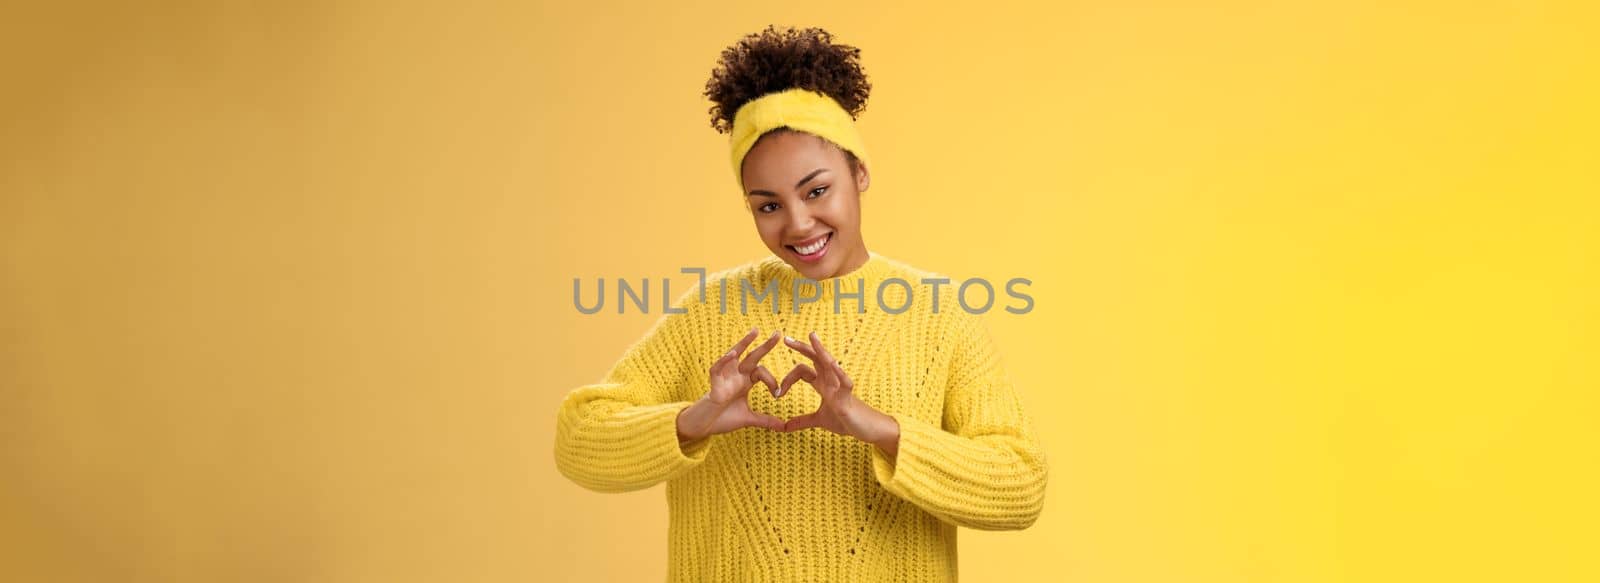 Lovely tender stylish african-american girl curly hairstyle headband sweater showing heart love gesture gladly smiling flirty tilting head express sympathy passion desire, posing yellow background.